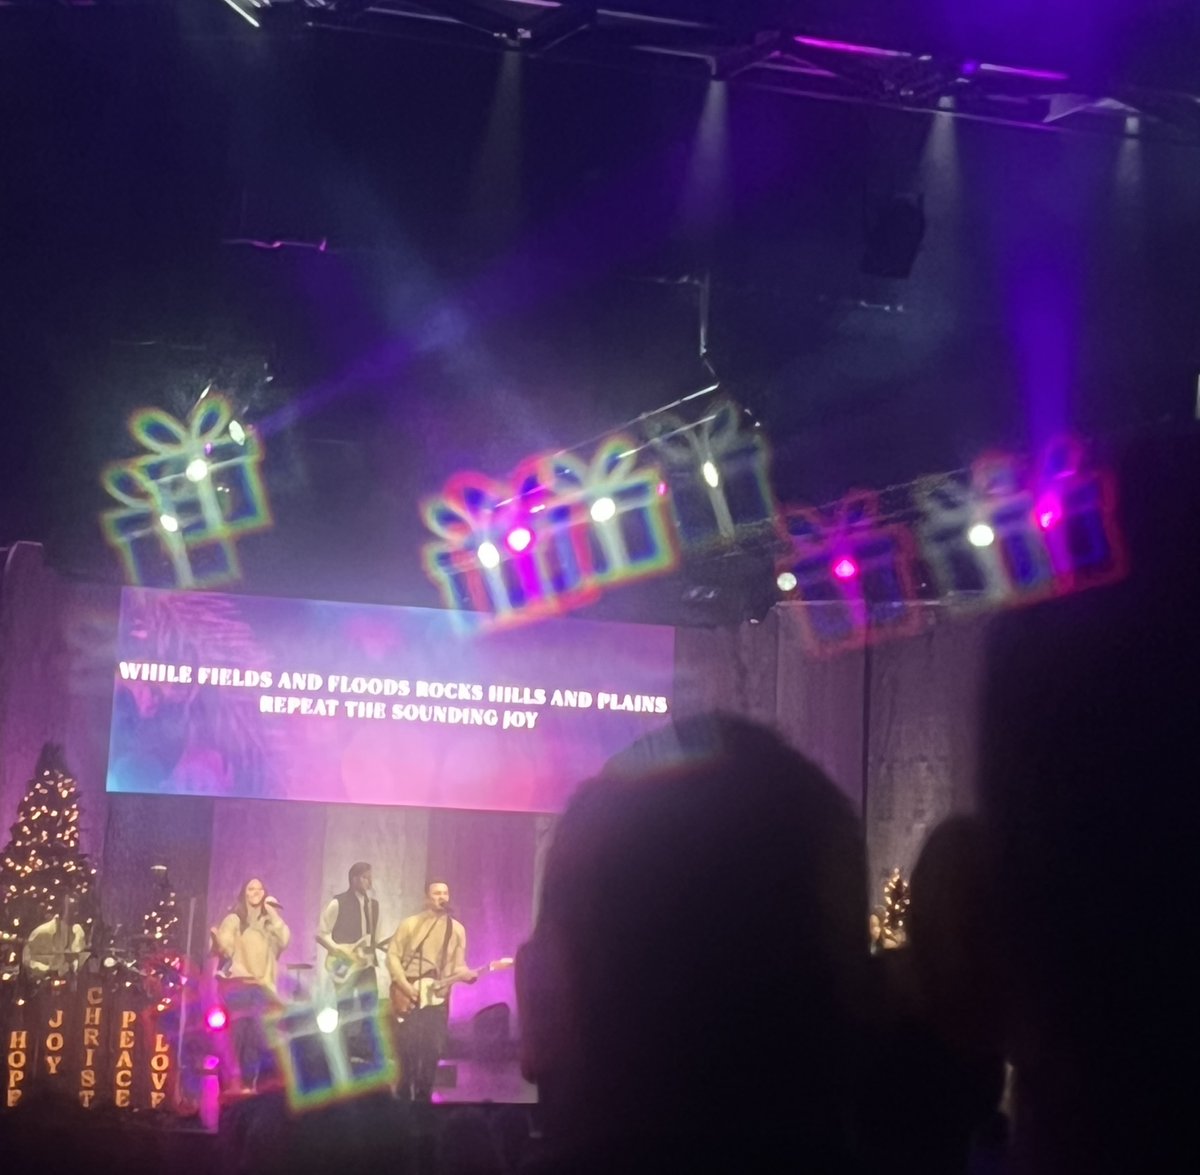 At the St. Charles/South Elgin Campus, we got ahold of some @HolidaySpecs during the ccclife.org/live service and every light became more magical. #ccclife